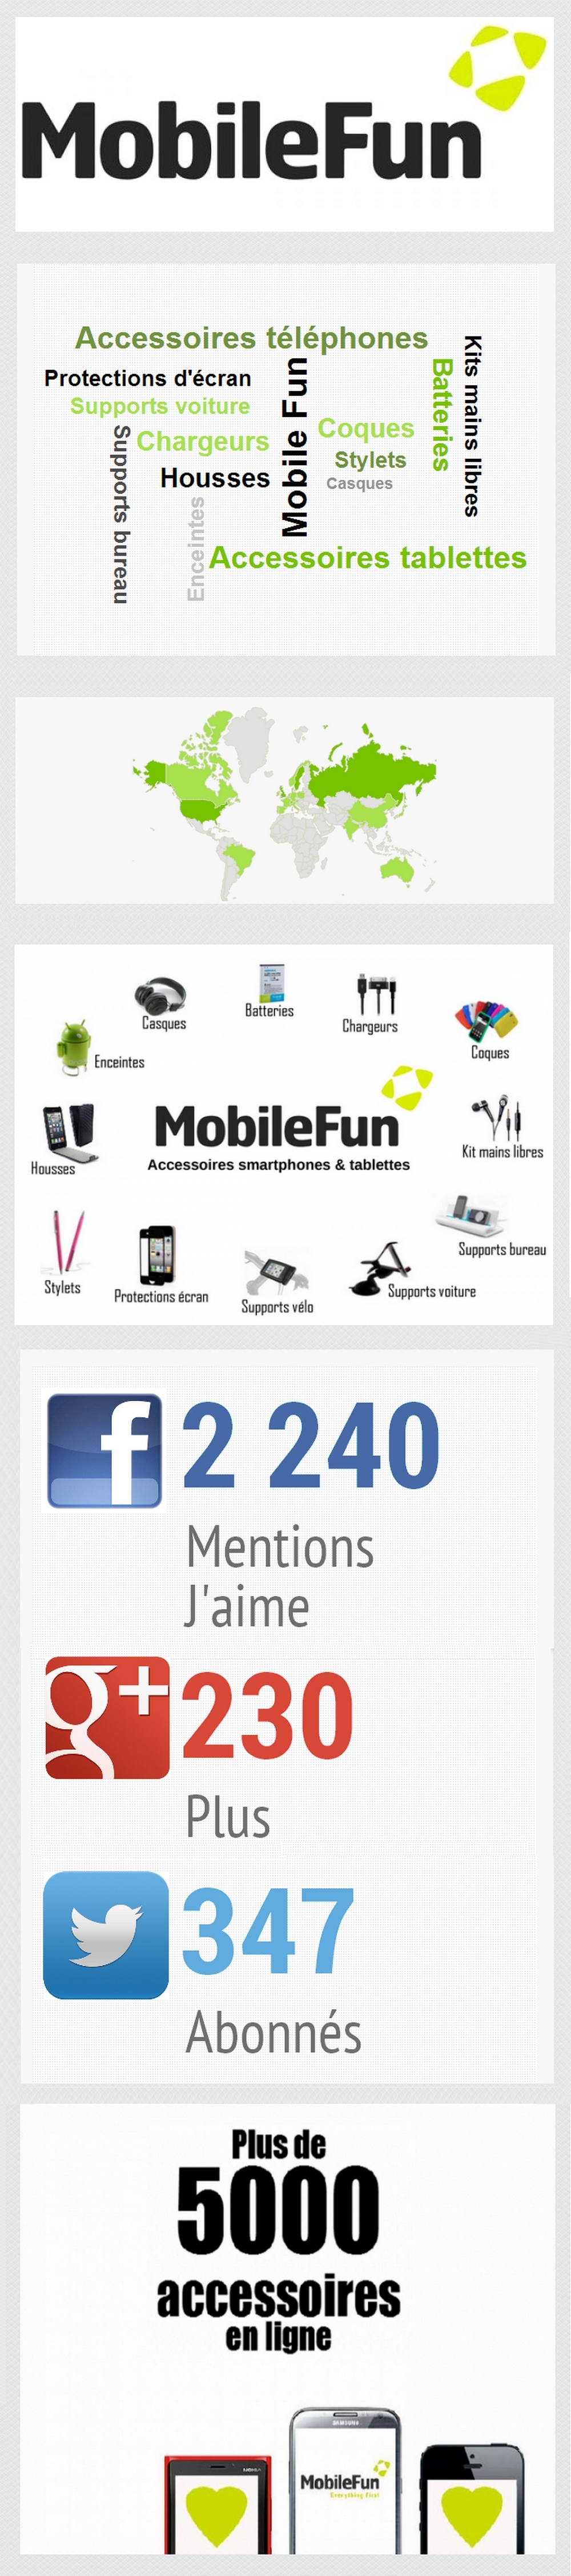 Infographie MobileFunFrance 2013